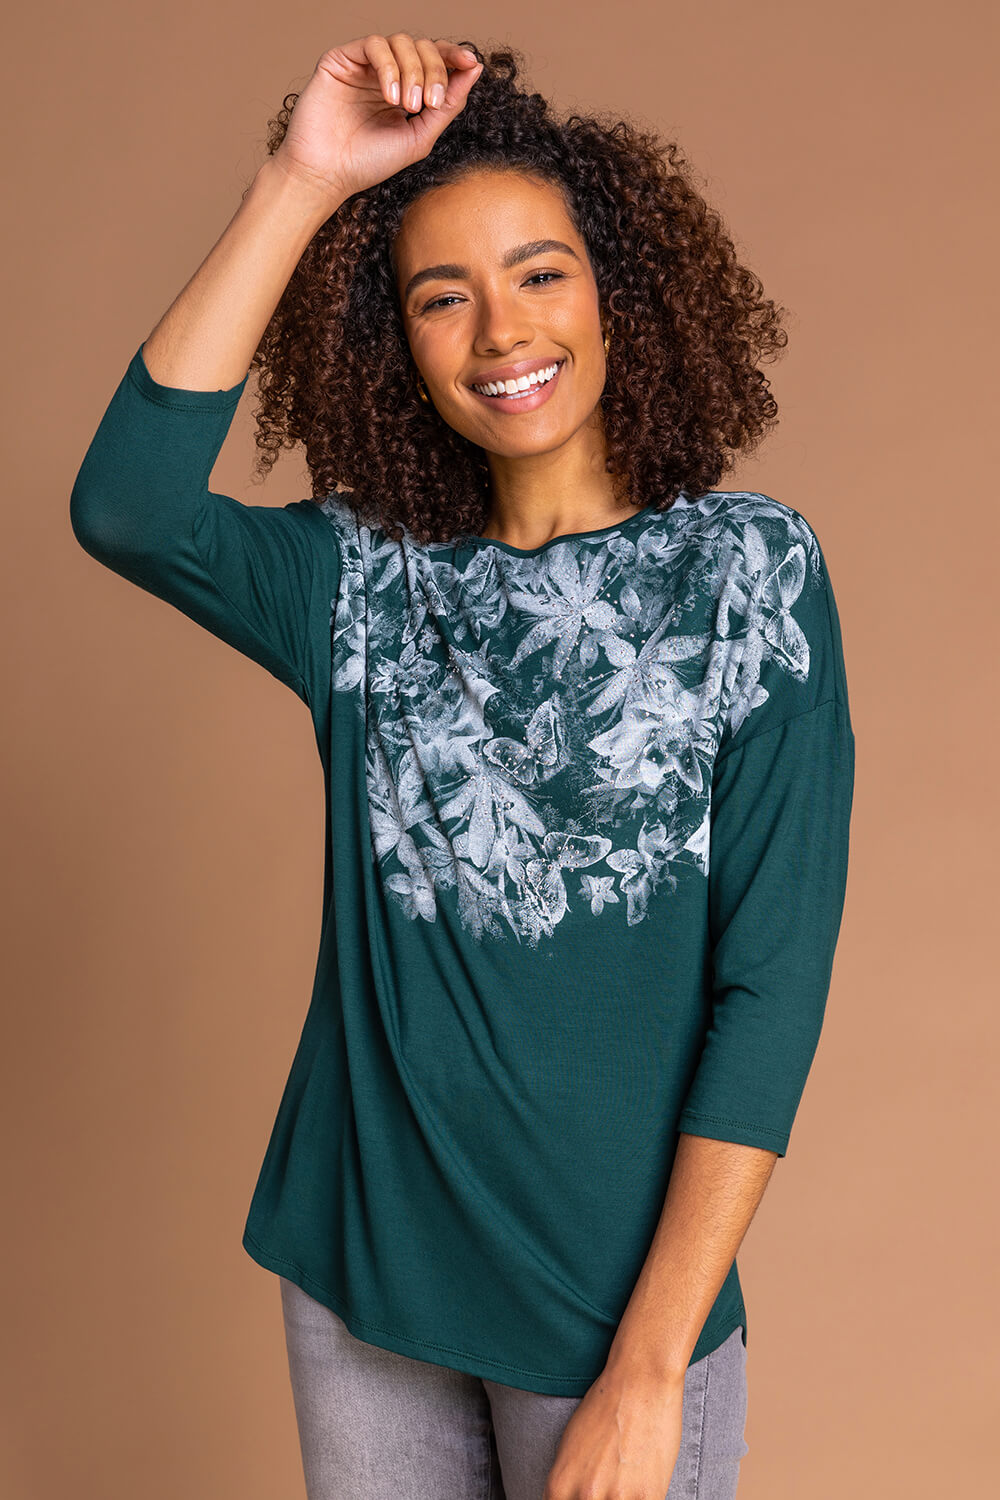 Emerald Floral Butterfly Print Top, Image 5 of 5